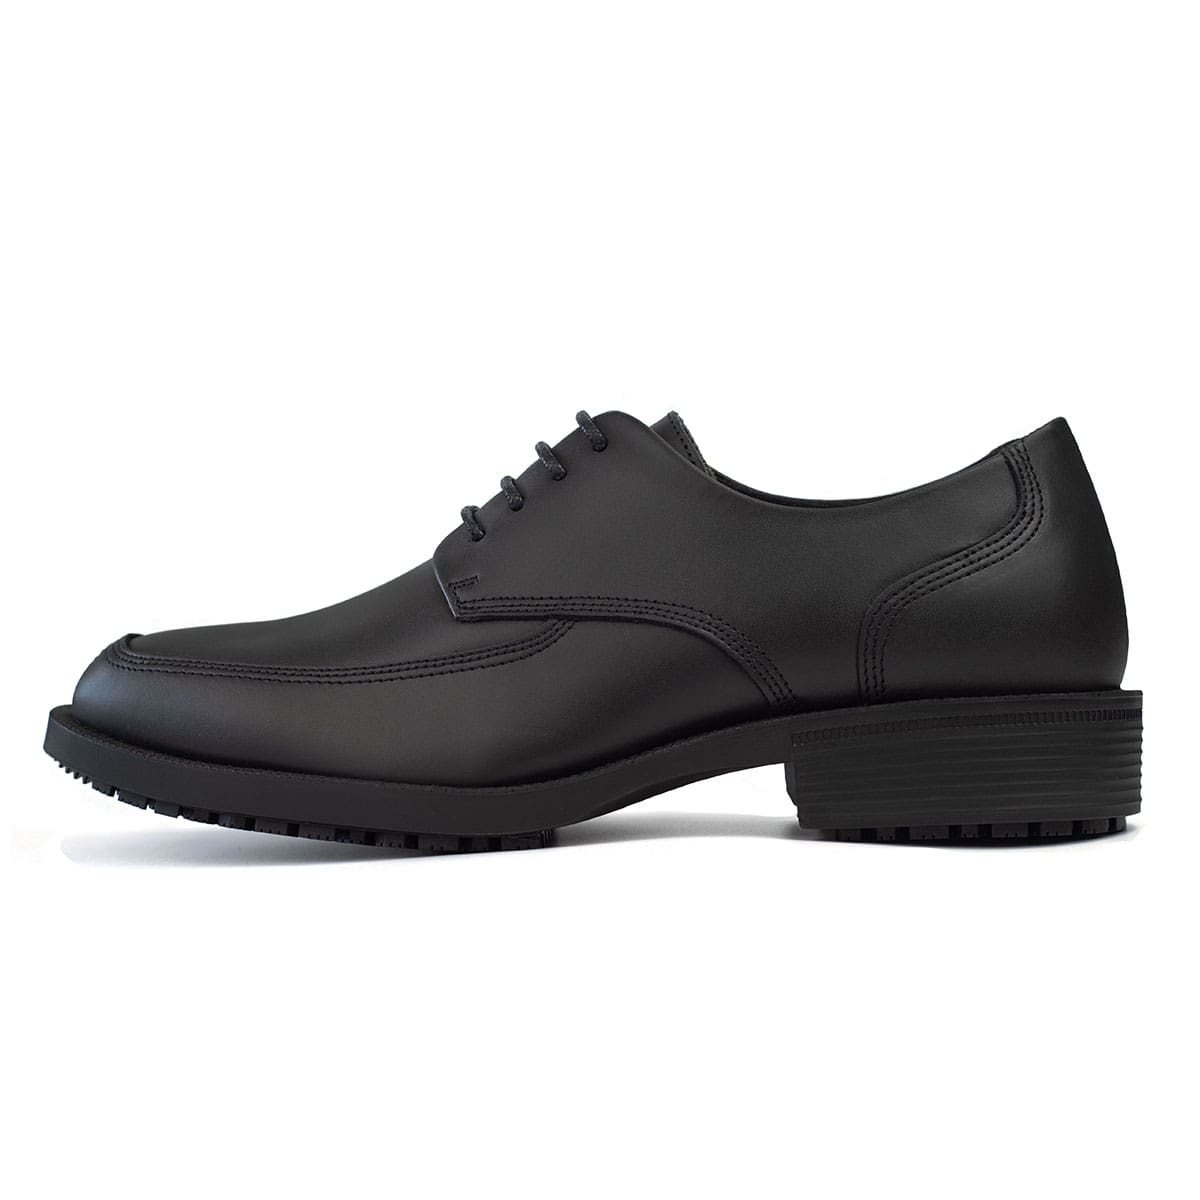 Non-slip black formal shoe with waterproof leather upper and a removable, cushioned insole, left side view.